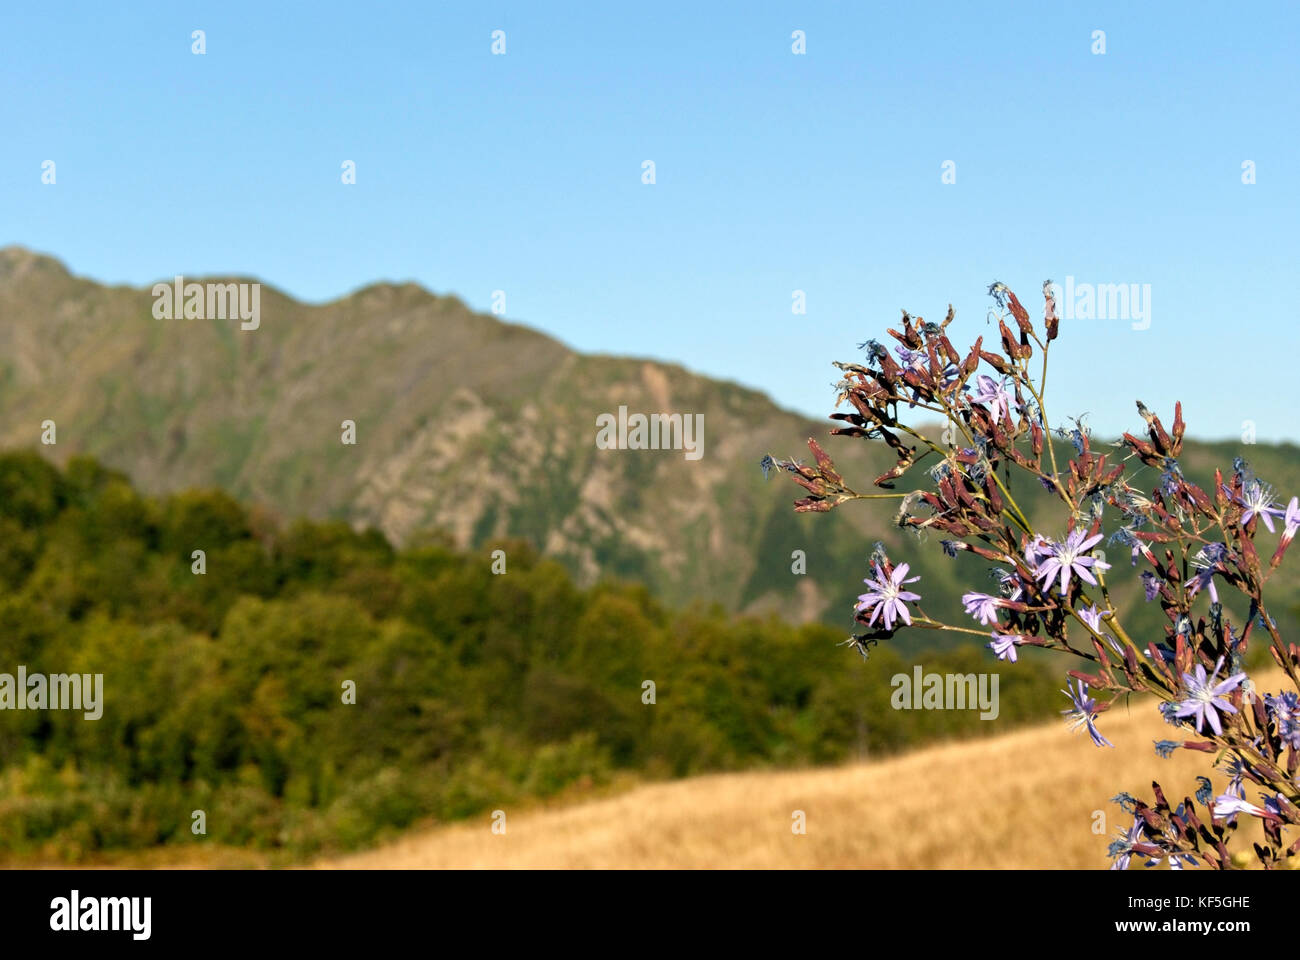 Overblown blue lettuce (Lactuca tatarica) in a natural environment against a blurred mountain landscape Stock Photo